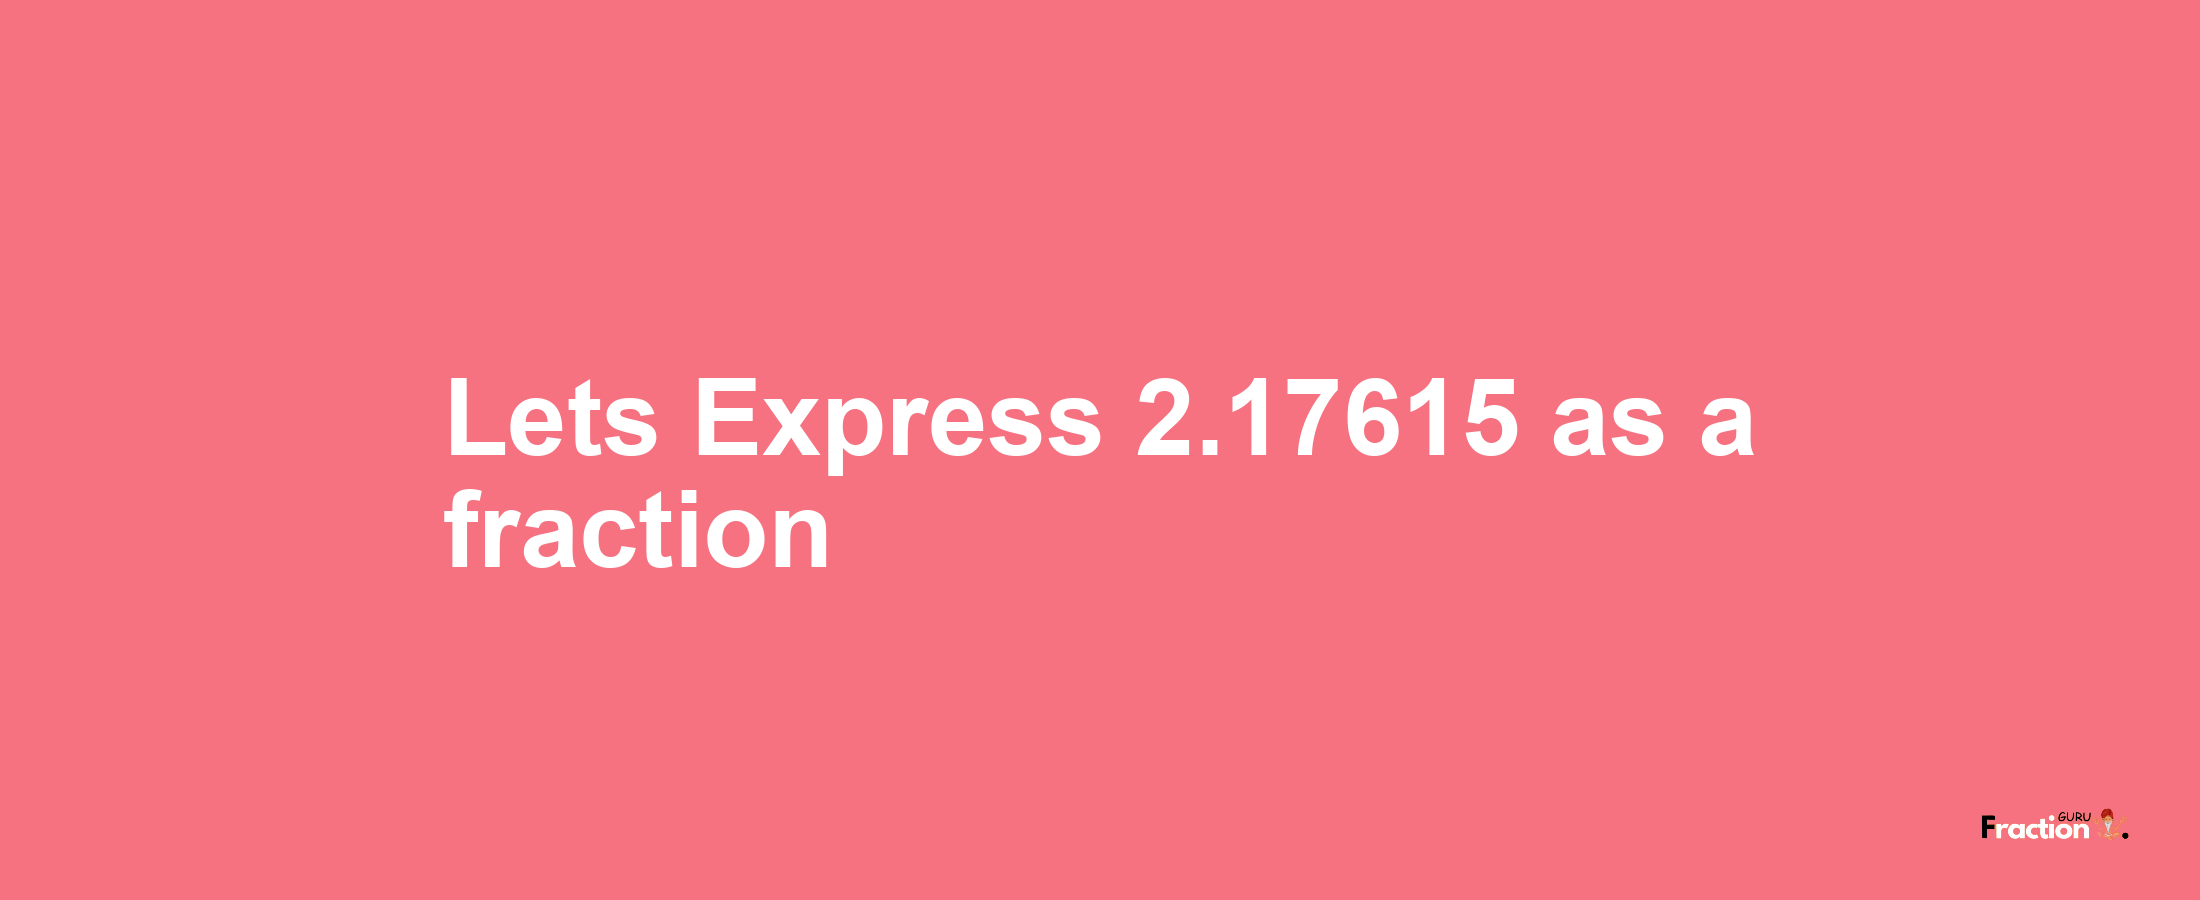 Lets Express 2.17615 as afraction